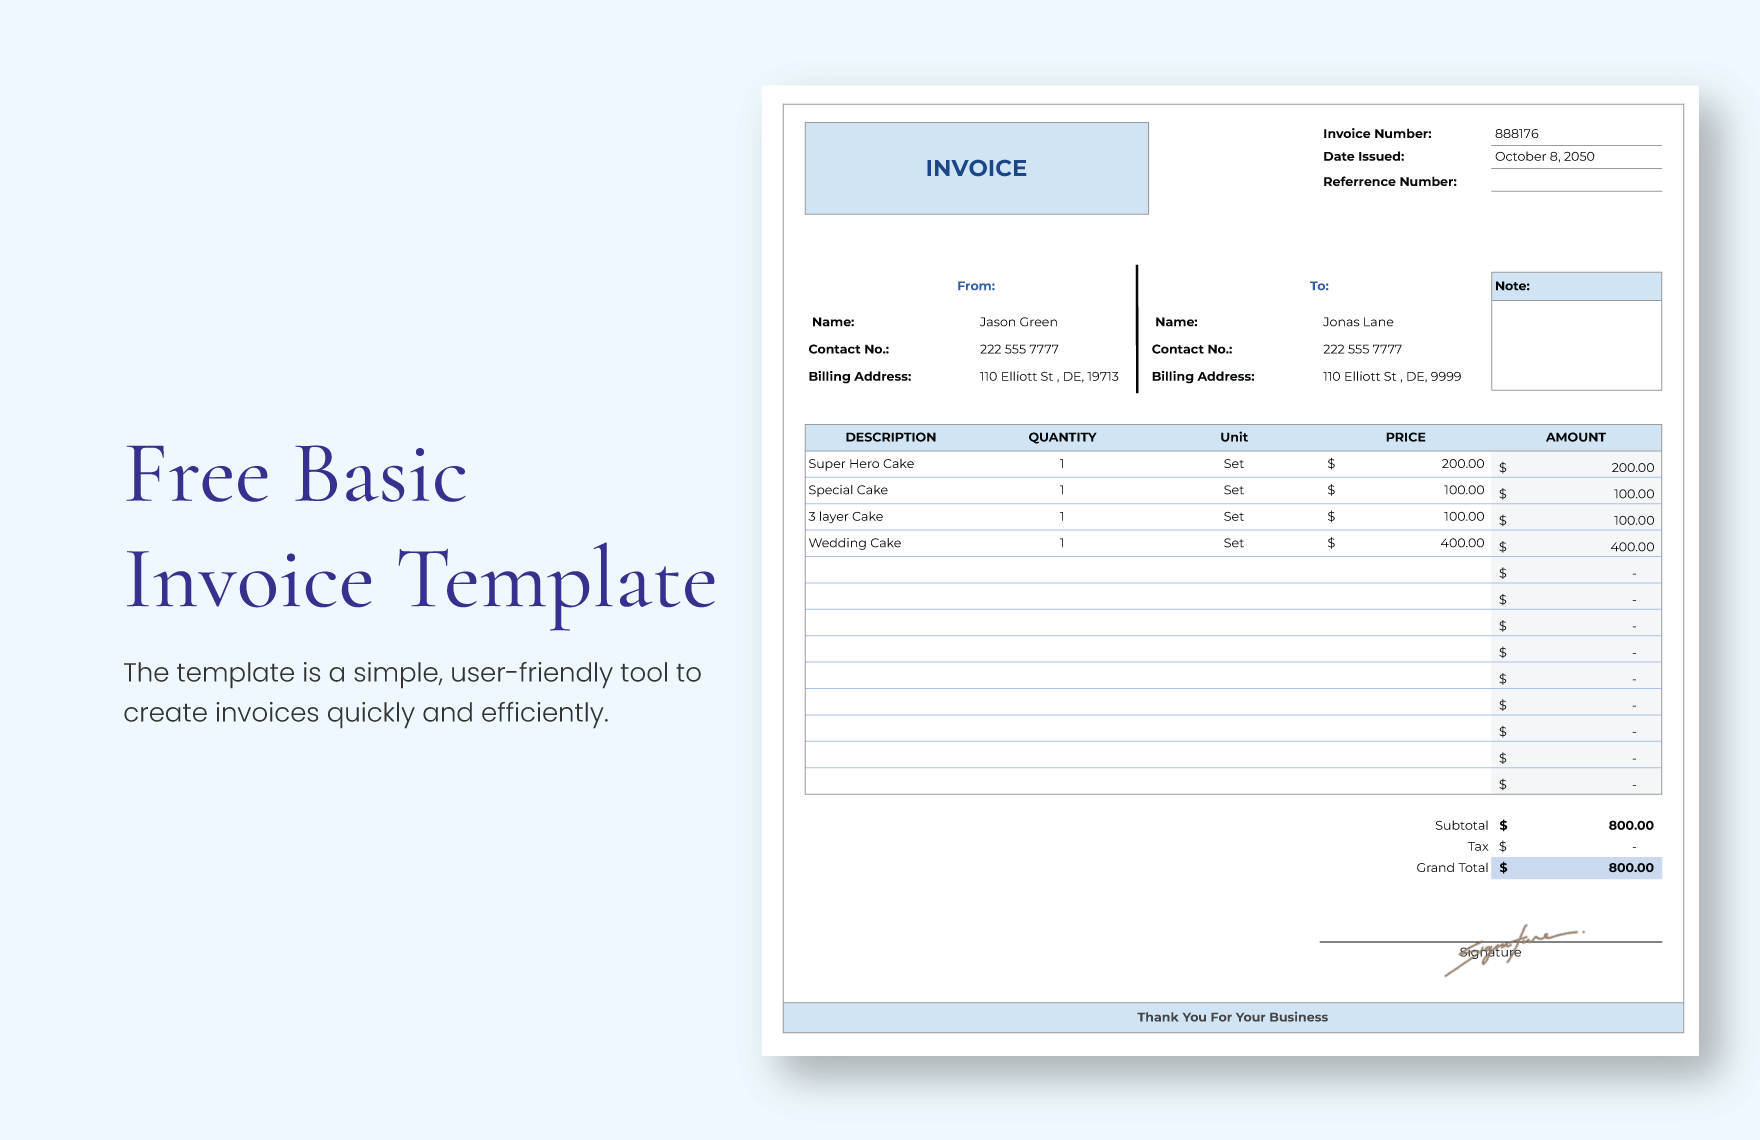 template invoice excel